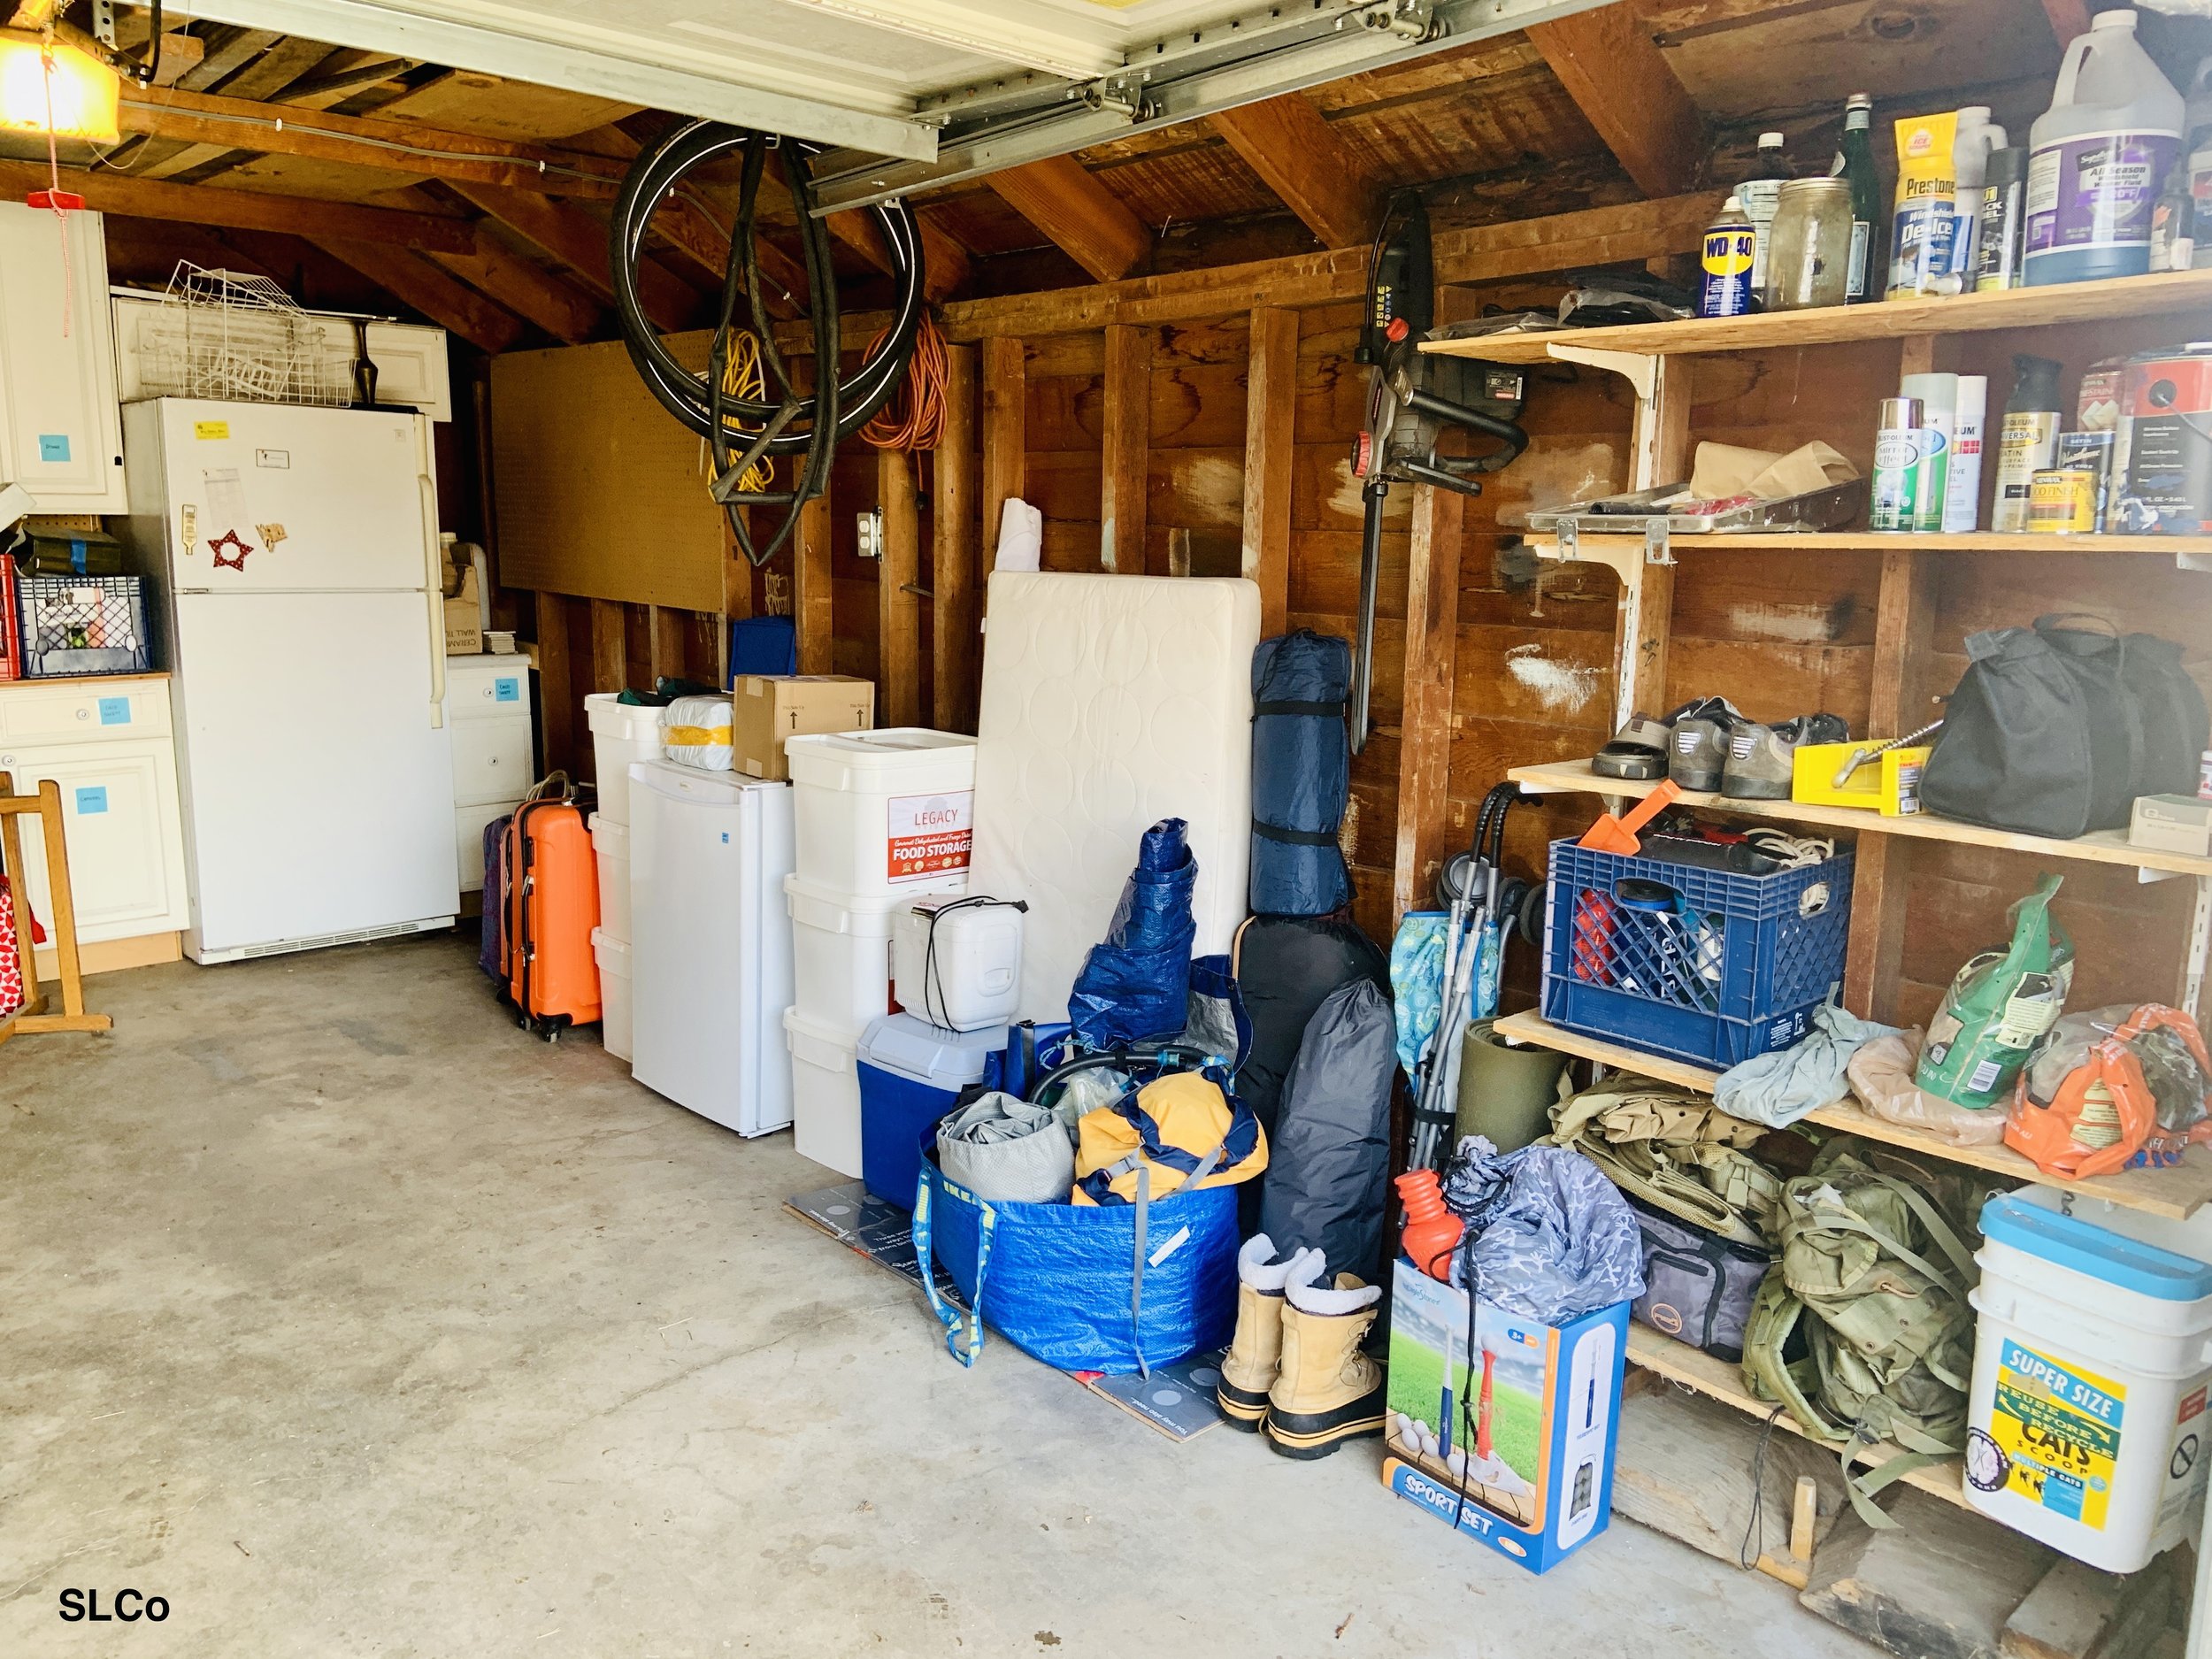 After photo of garage with clear floor, facing the back of the garage, items neatly placed against wall and fridge on the back wall